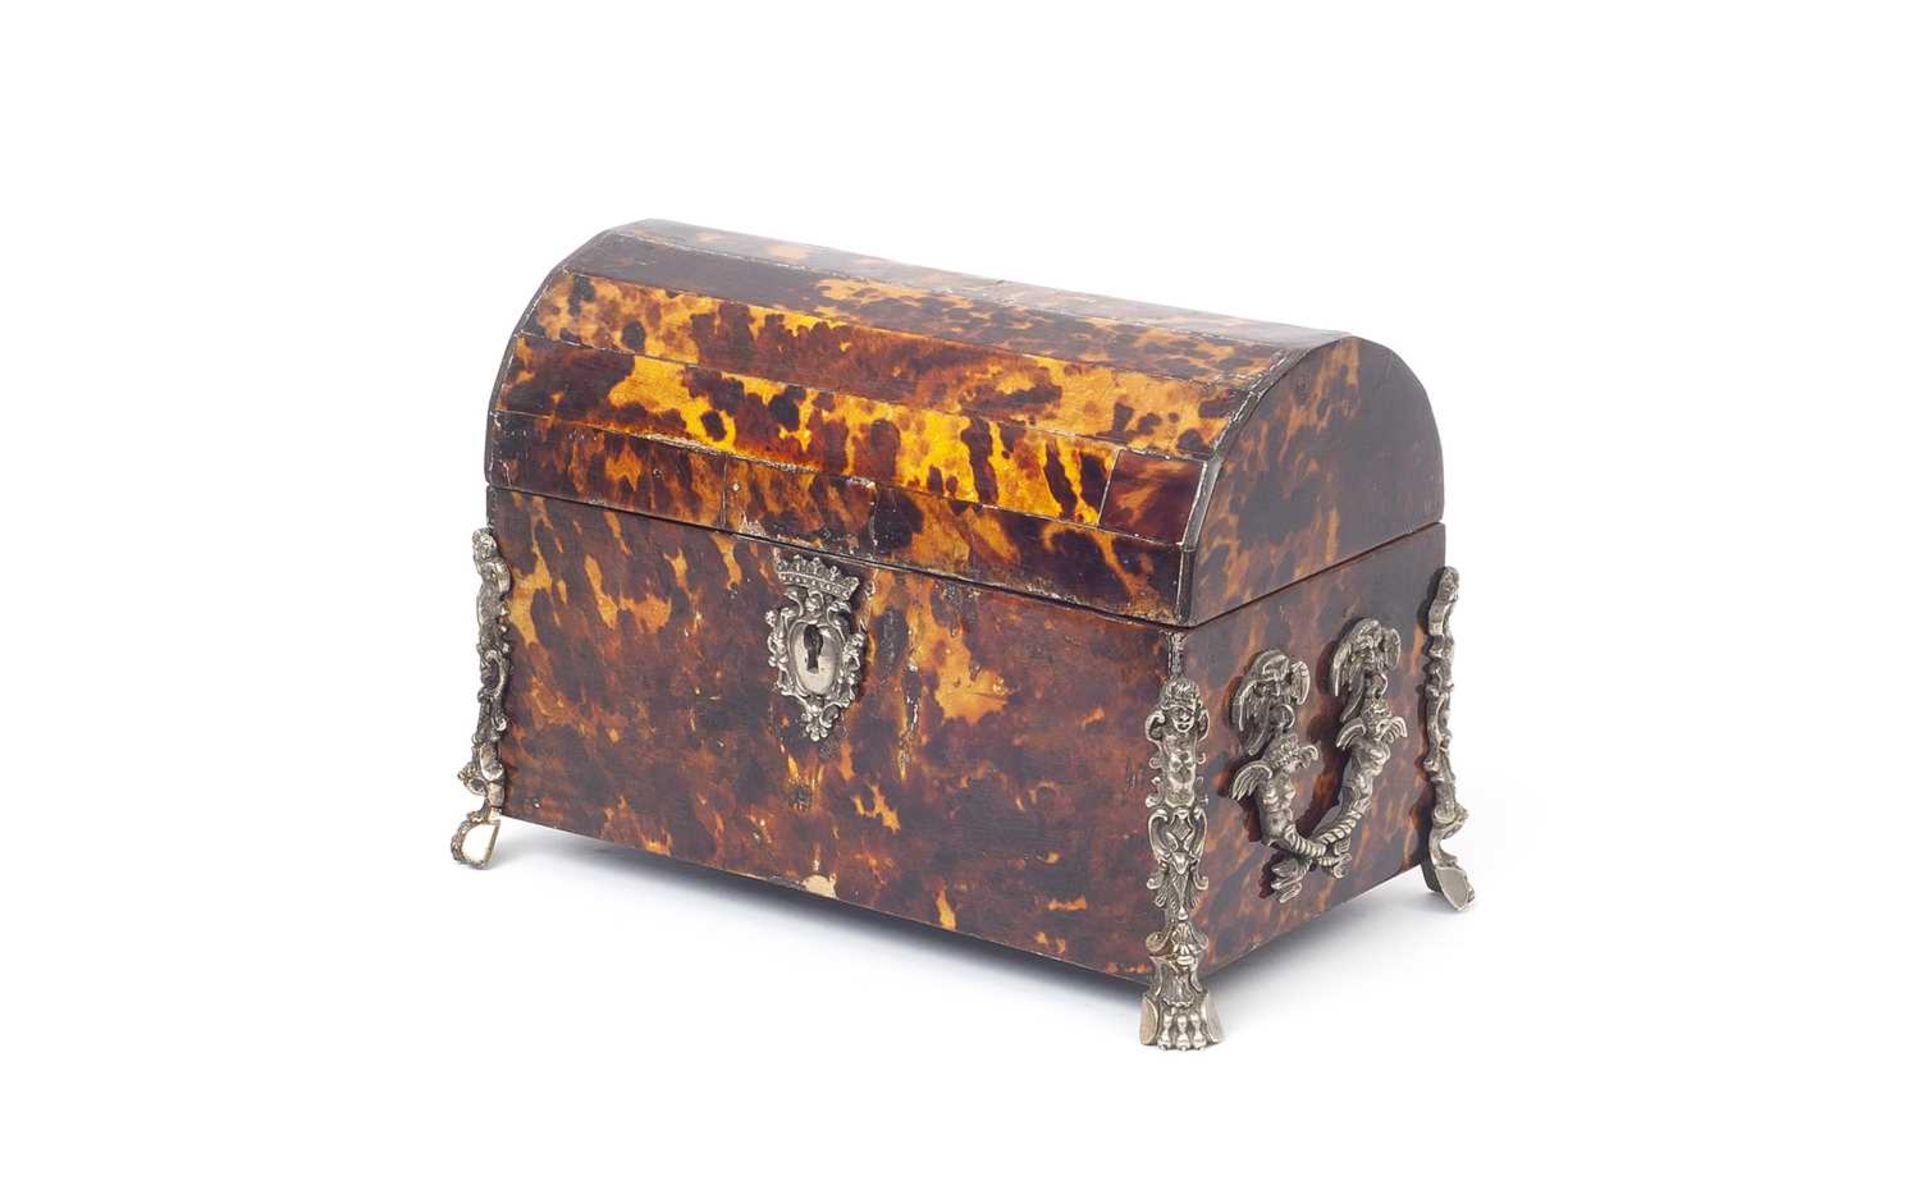 AN 18TH CENTURY DUTCH COLONIAL TORTOISESHELL AND SILVERED METAL MOUNTED CASKET - Image 2 of 4